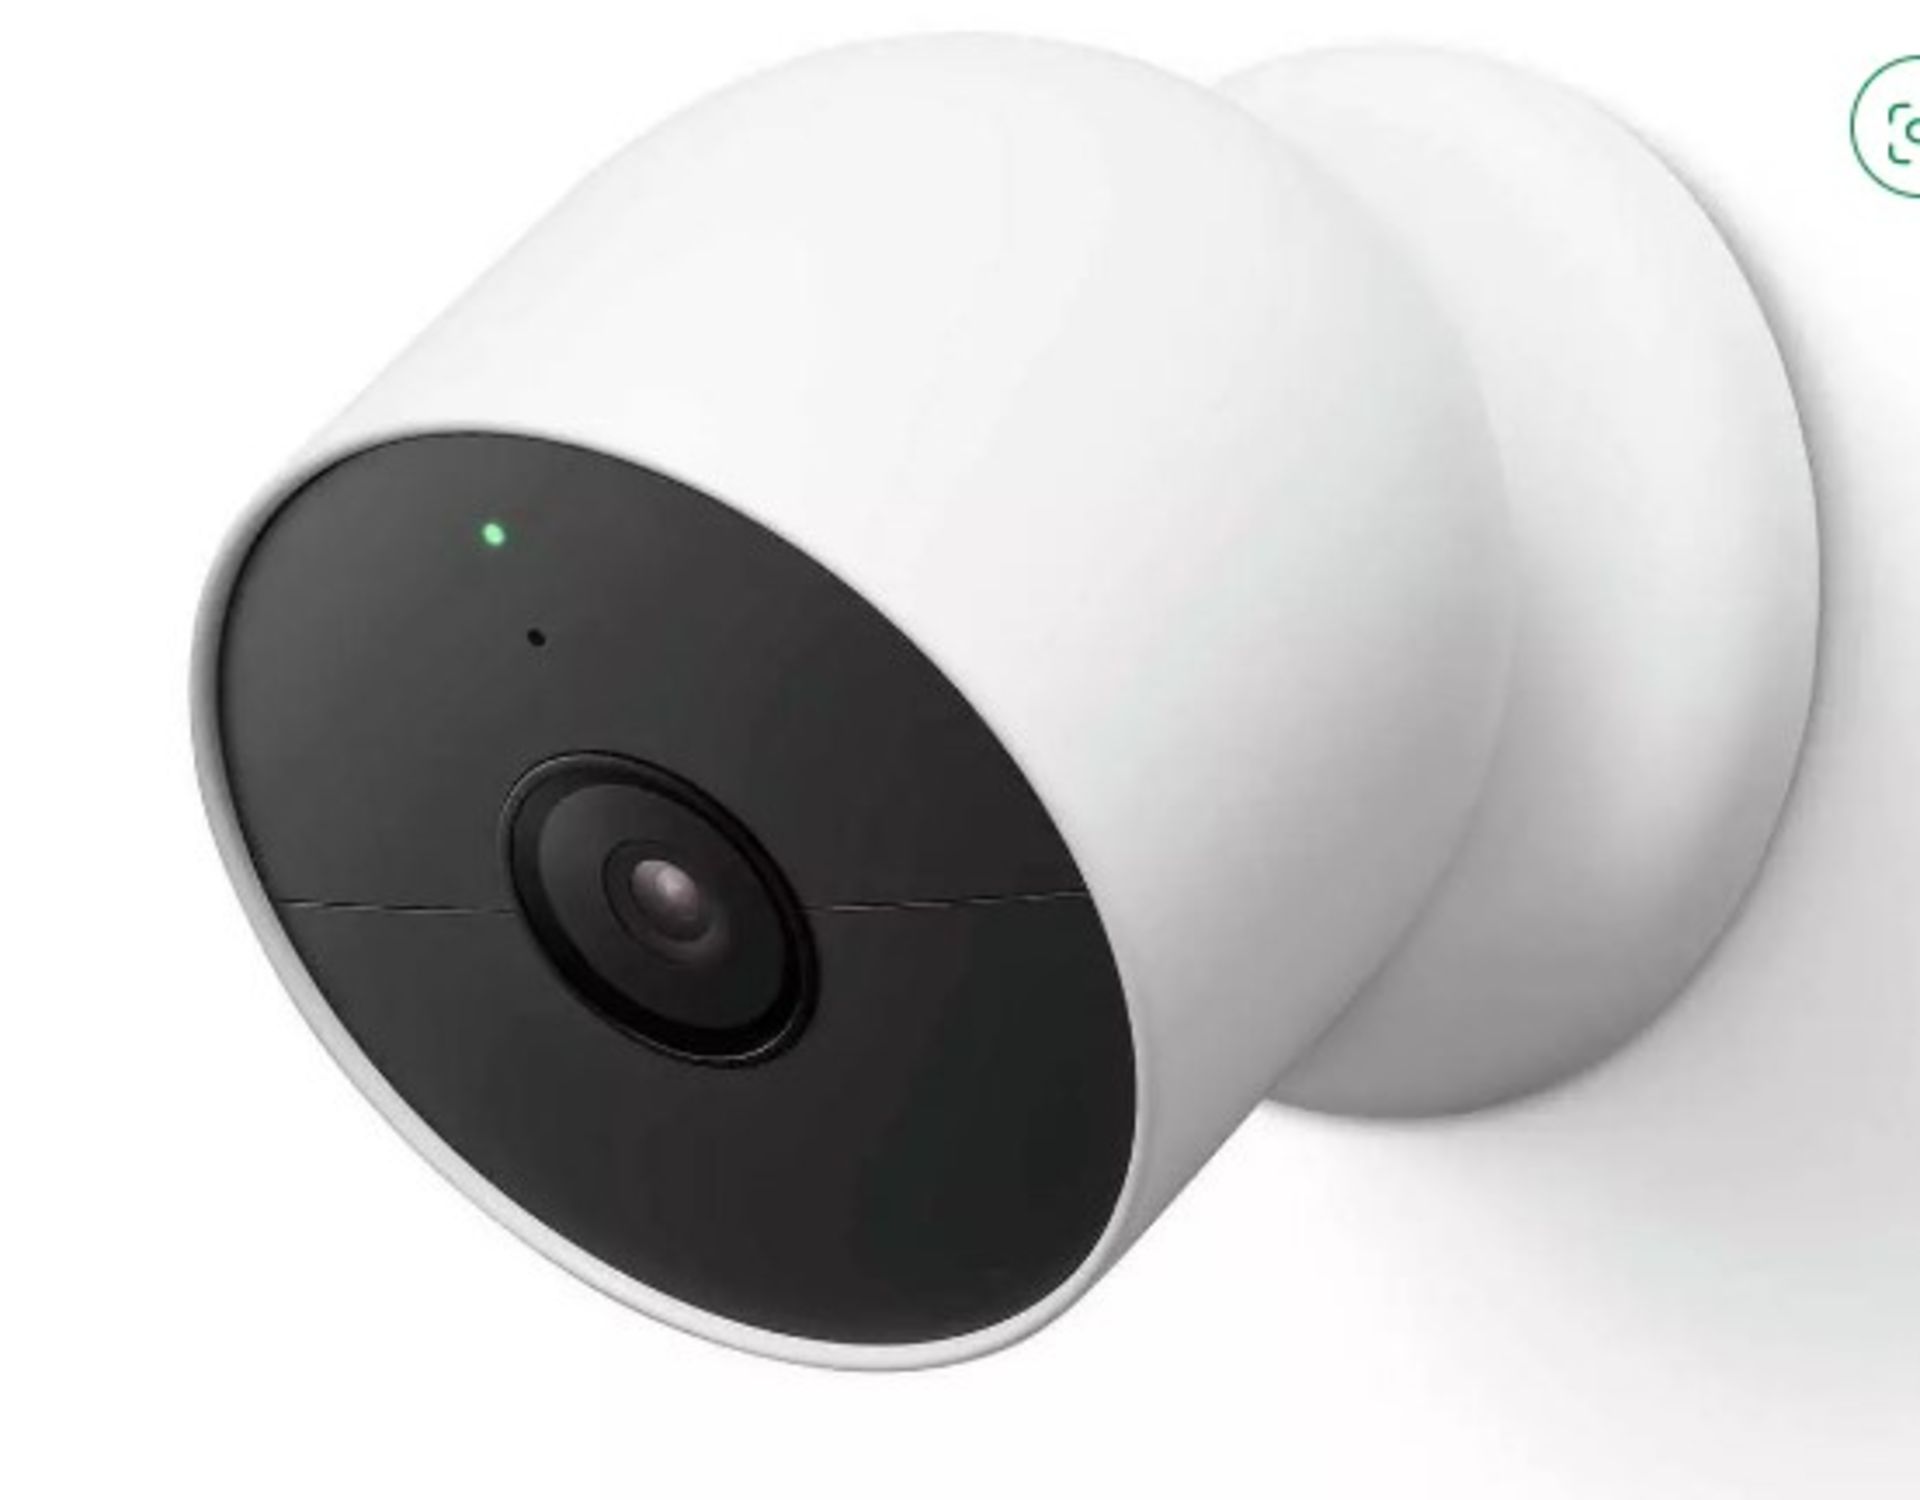 Google Nest Security Camera Indoor or Outdoor. The Nest Cam security camera is battery-powered and